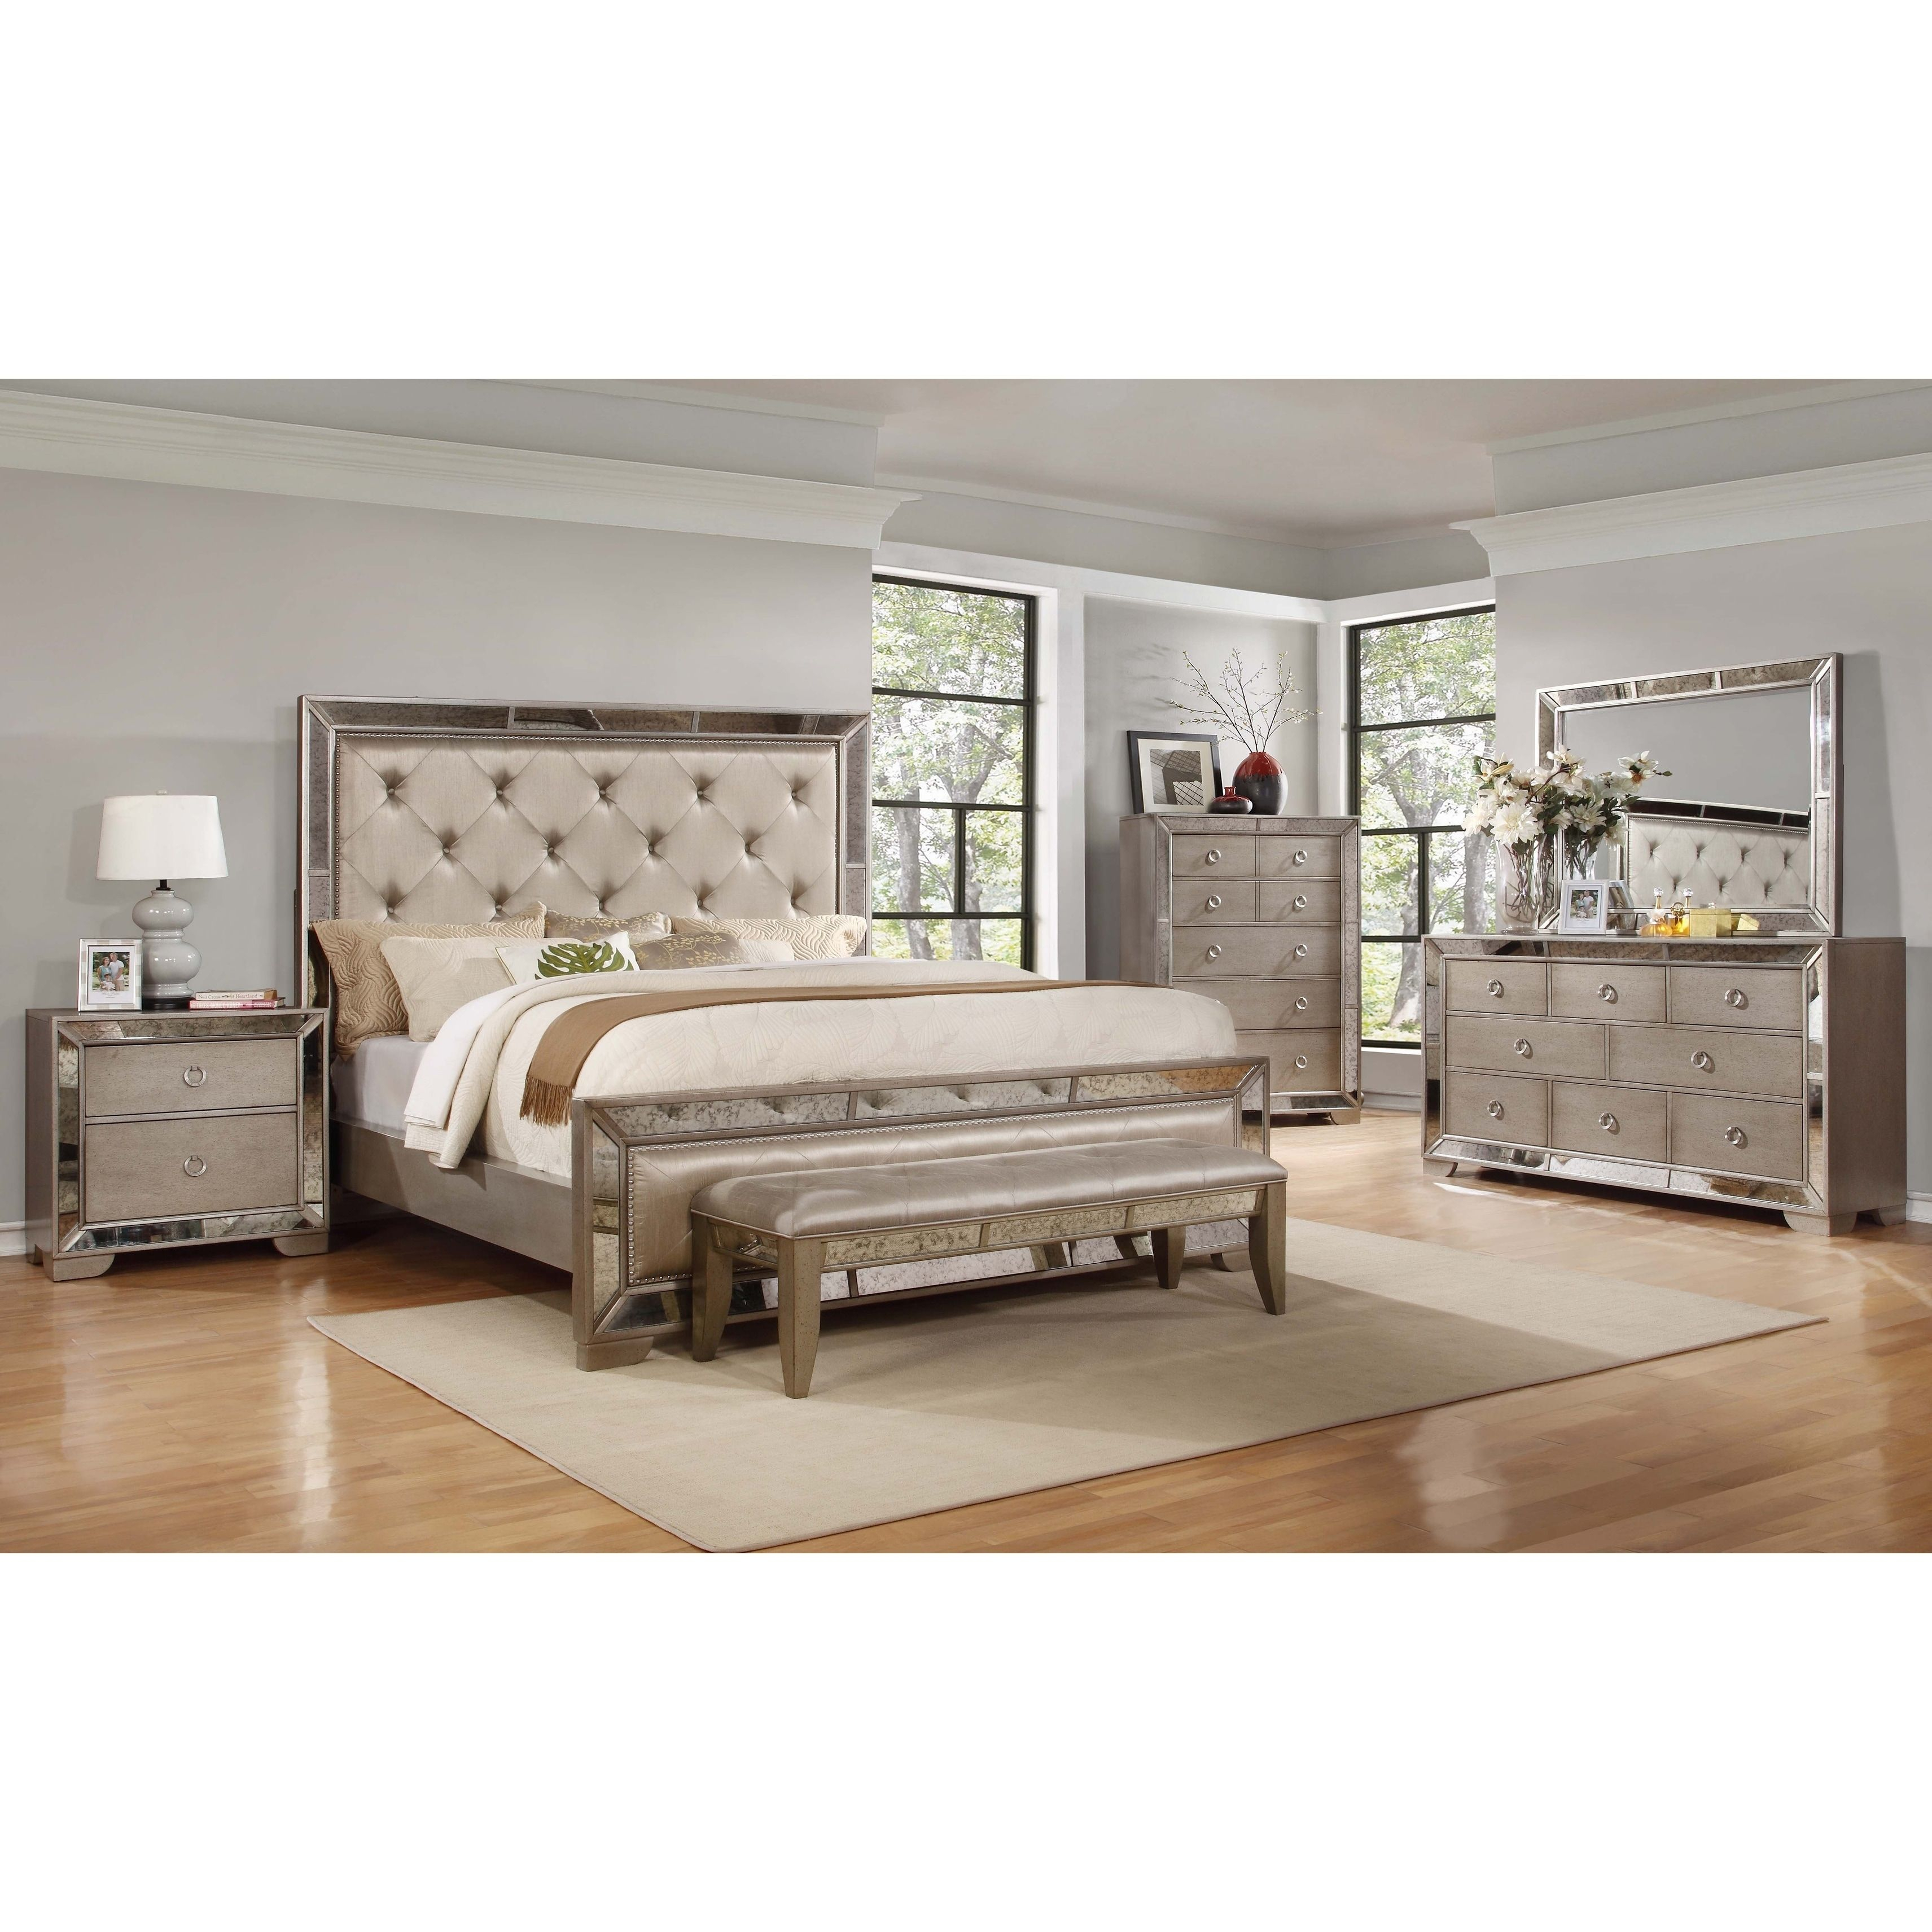 Best Master Furniture Ava 5 Piece Bedroom Set Room Decor Ideas in dimensions 3423 X 3423